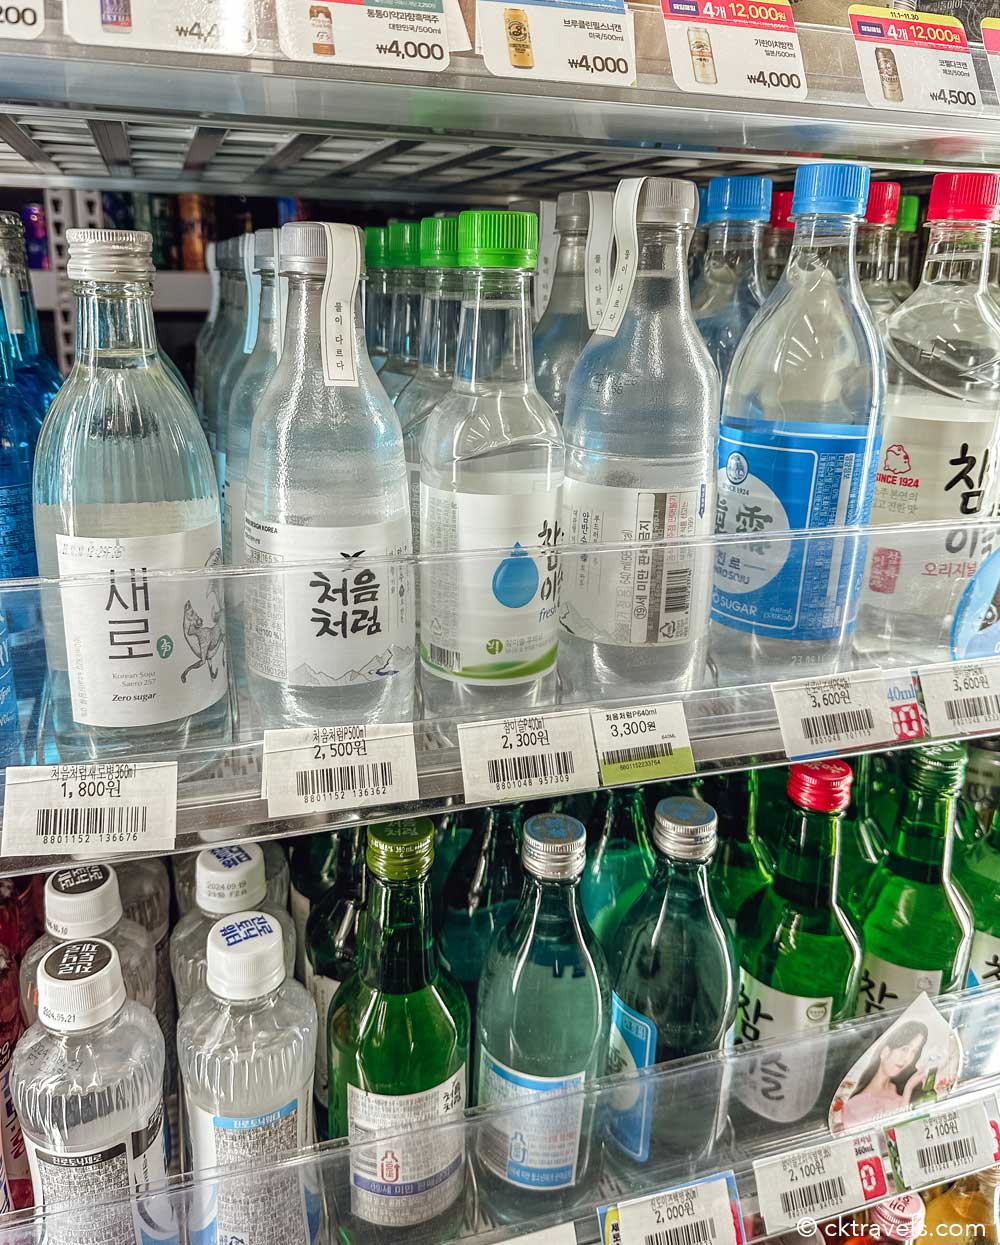 soju from CU convenience stores in South Korea